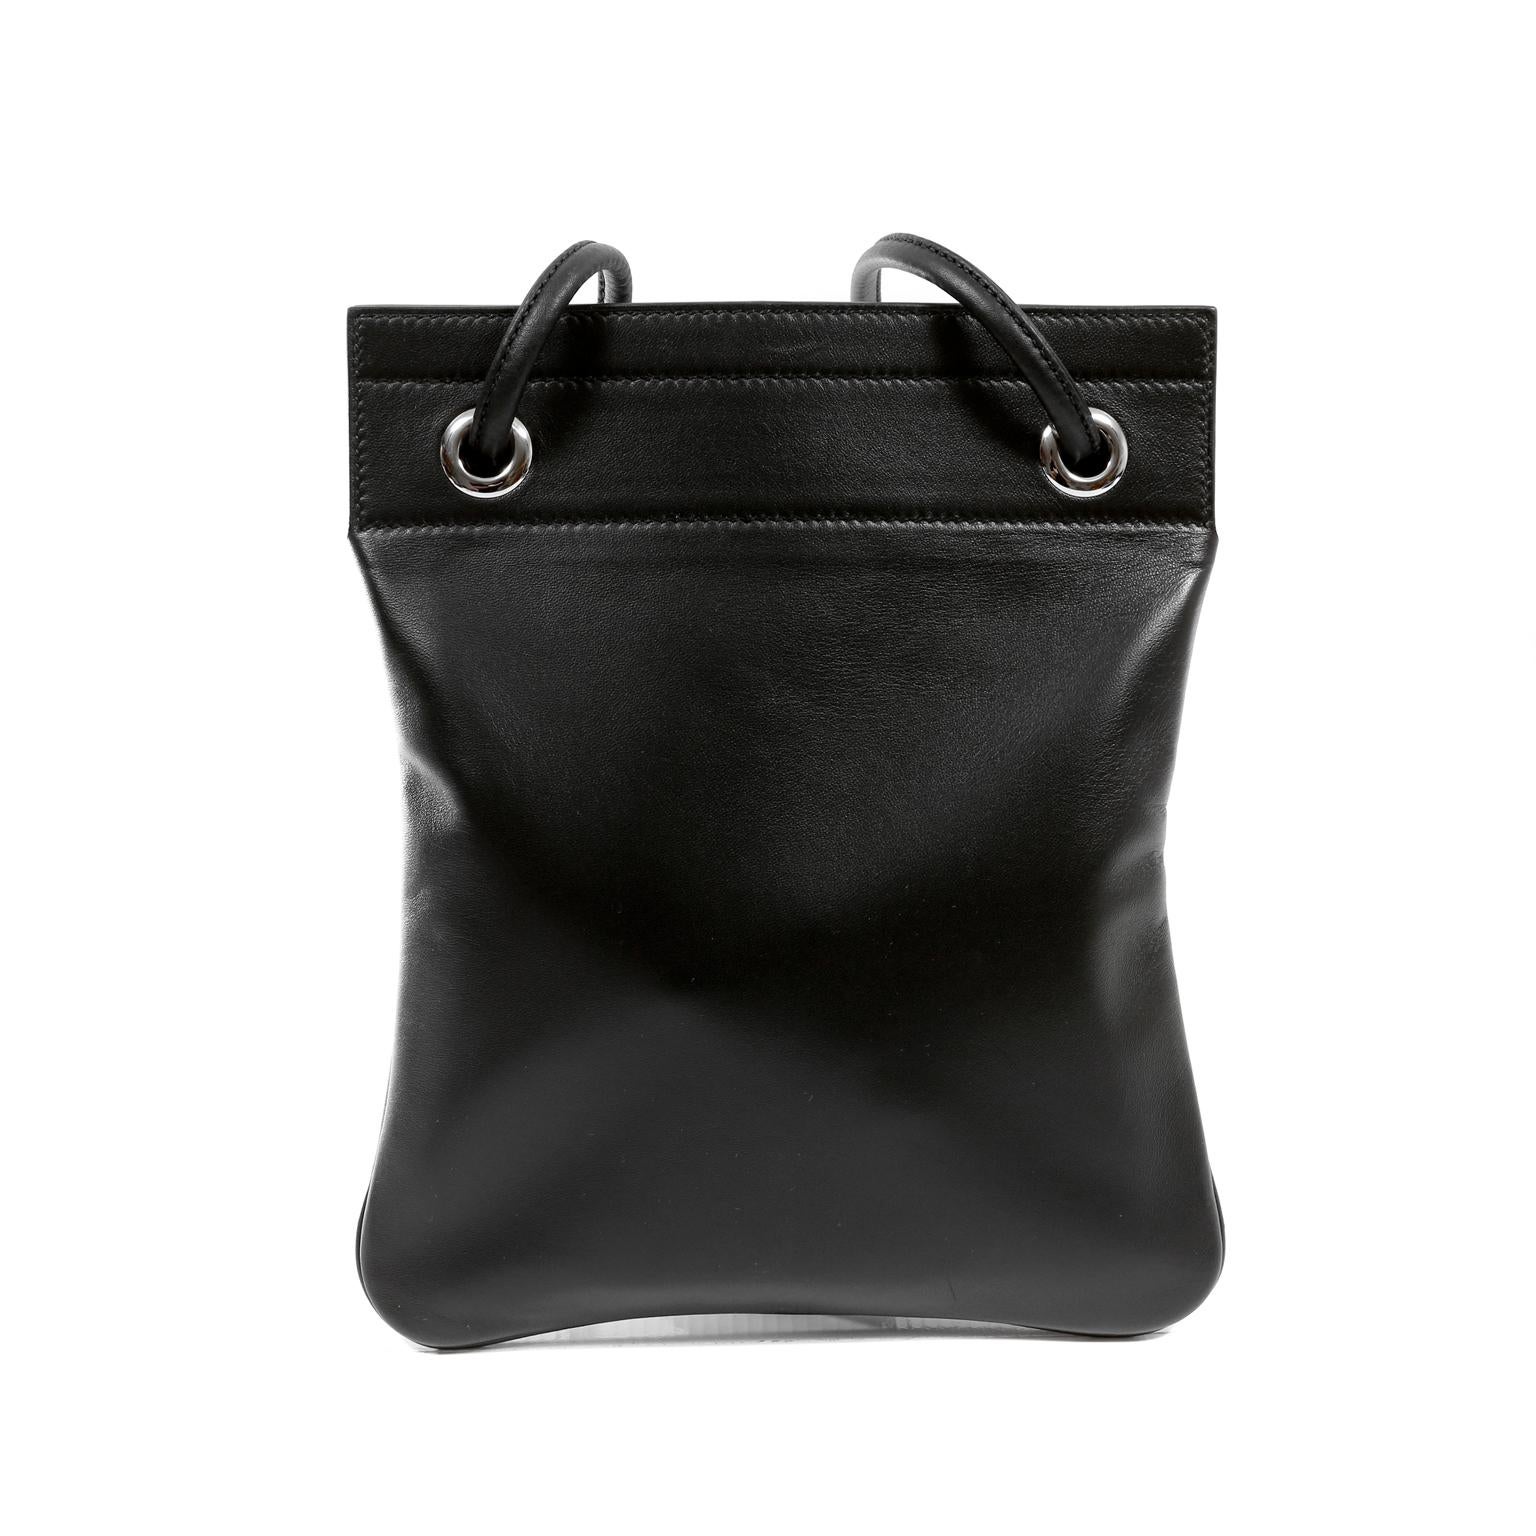 This authentic Hermès Black Leather Aline Mini Bag is in pristine condition.  Perfectly proportioned for crossbody wear, this small leather pouch is practical and chic.  Black leather slim pouch has feminine flower detail at the end of the long